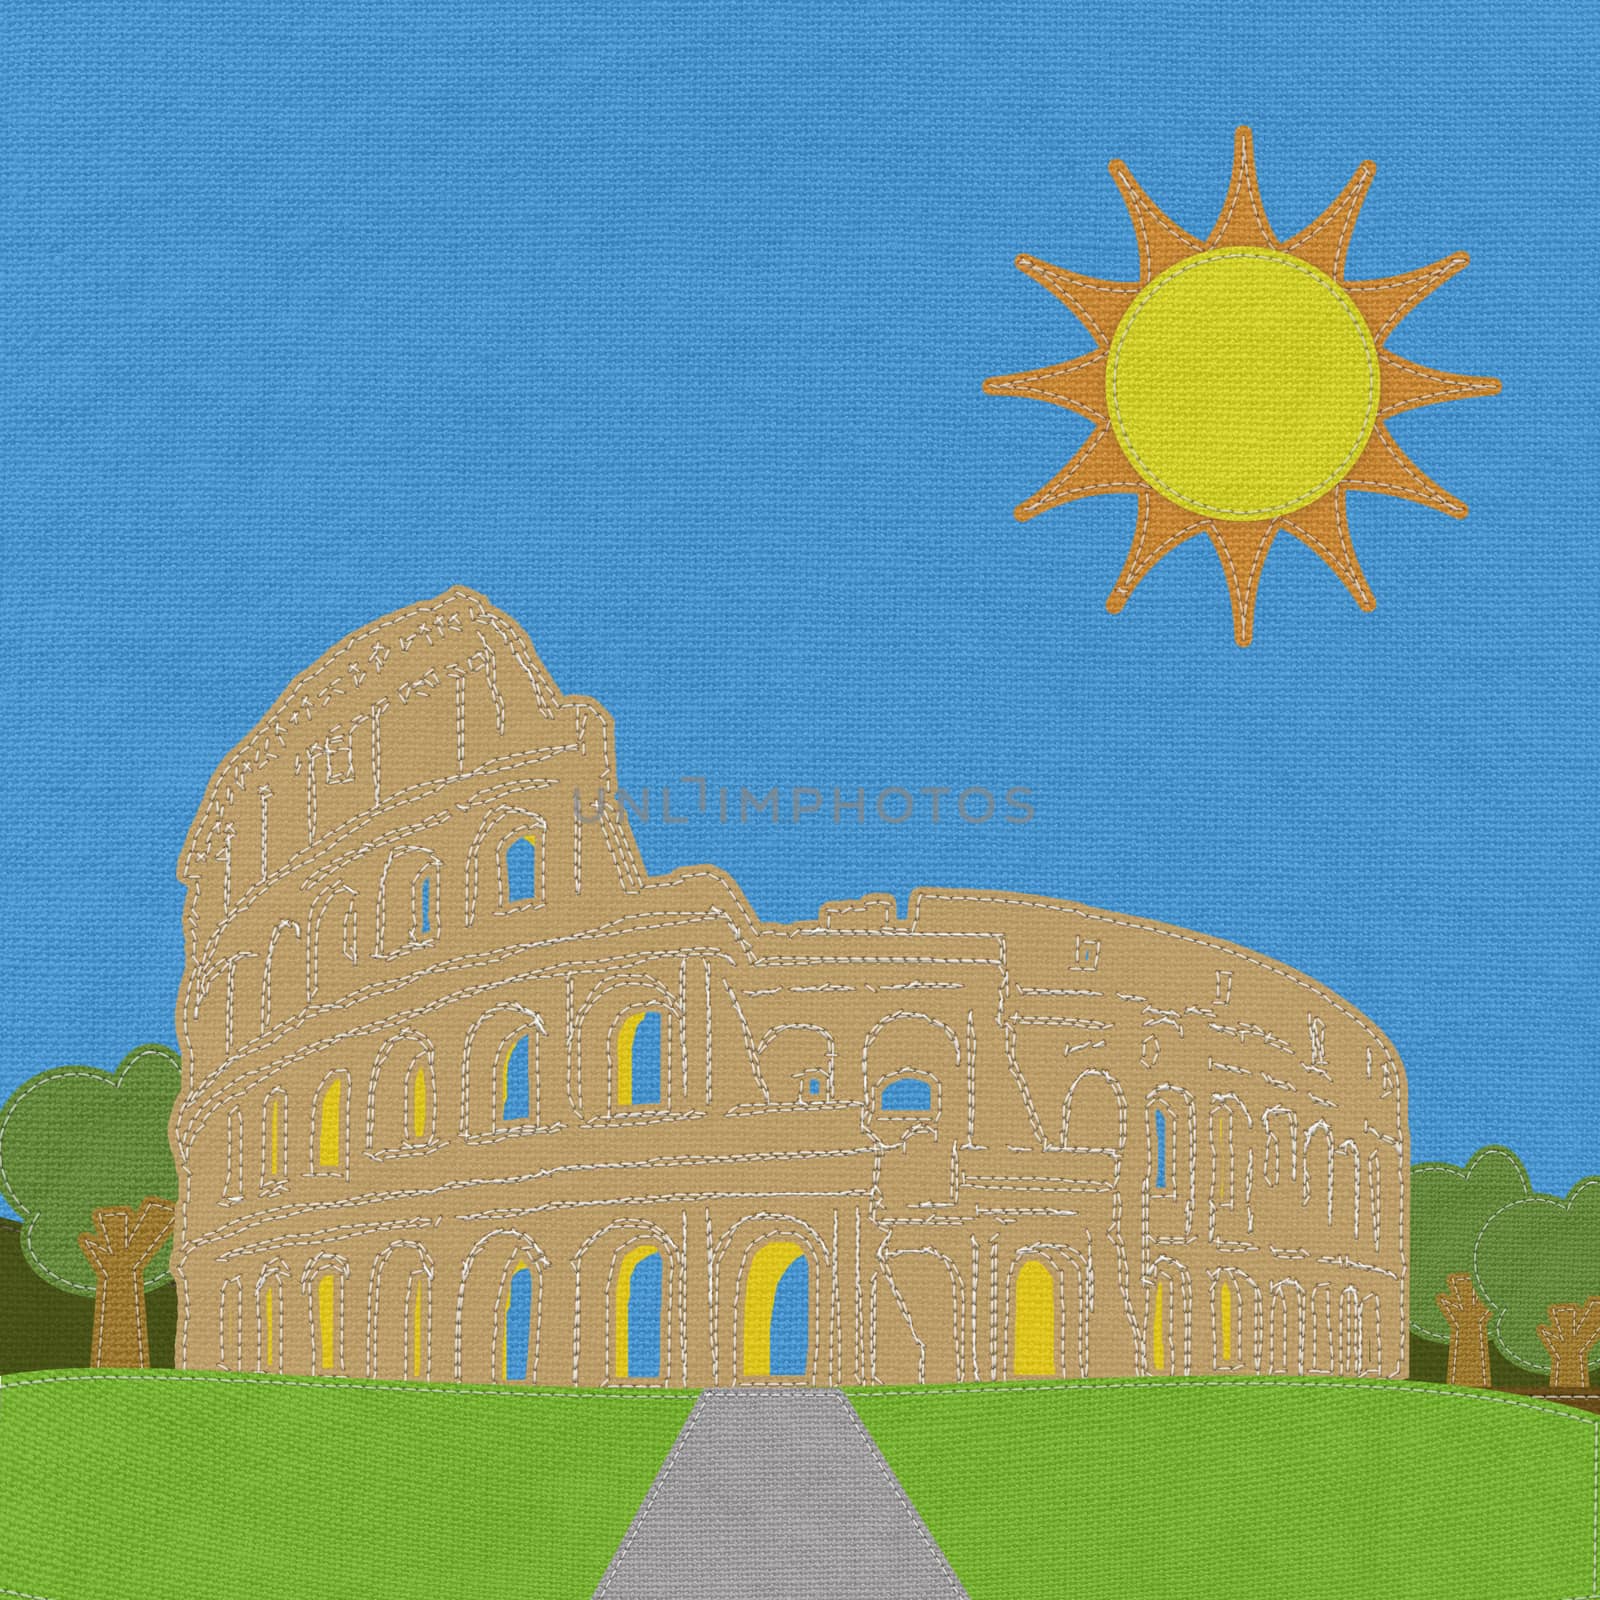 Colosseum in rome with stitch style on fabric background